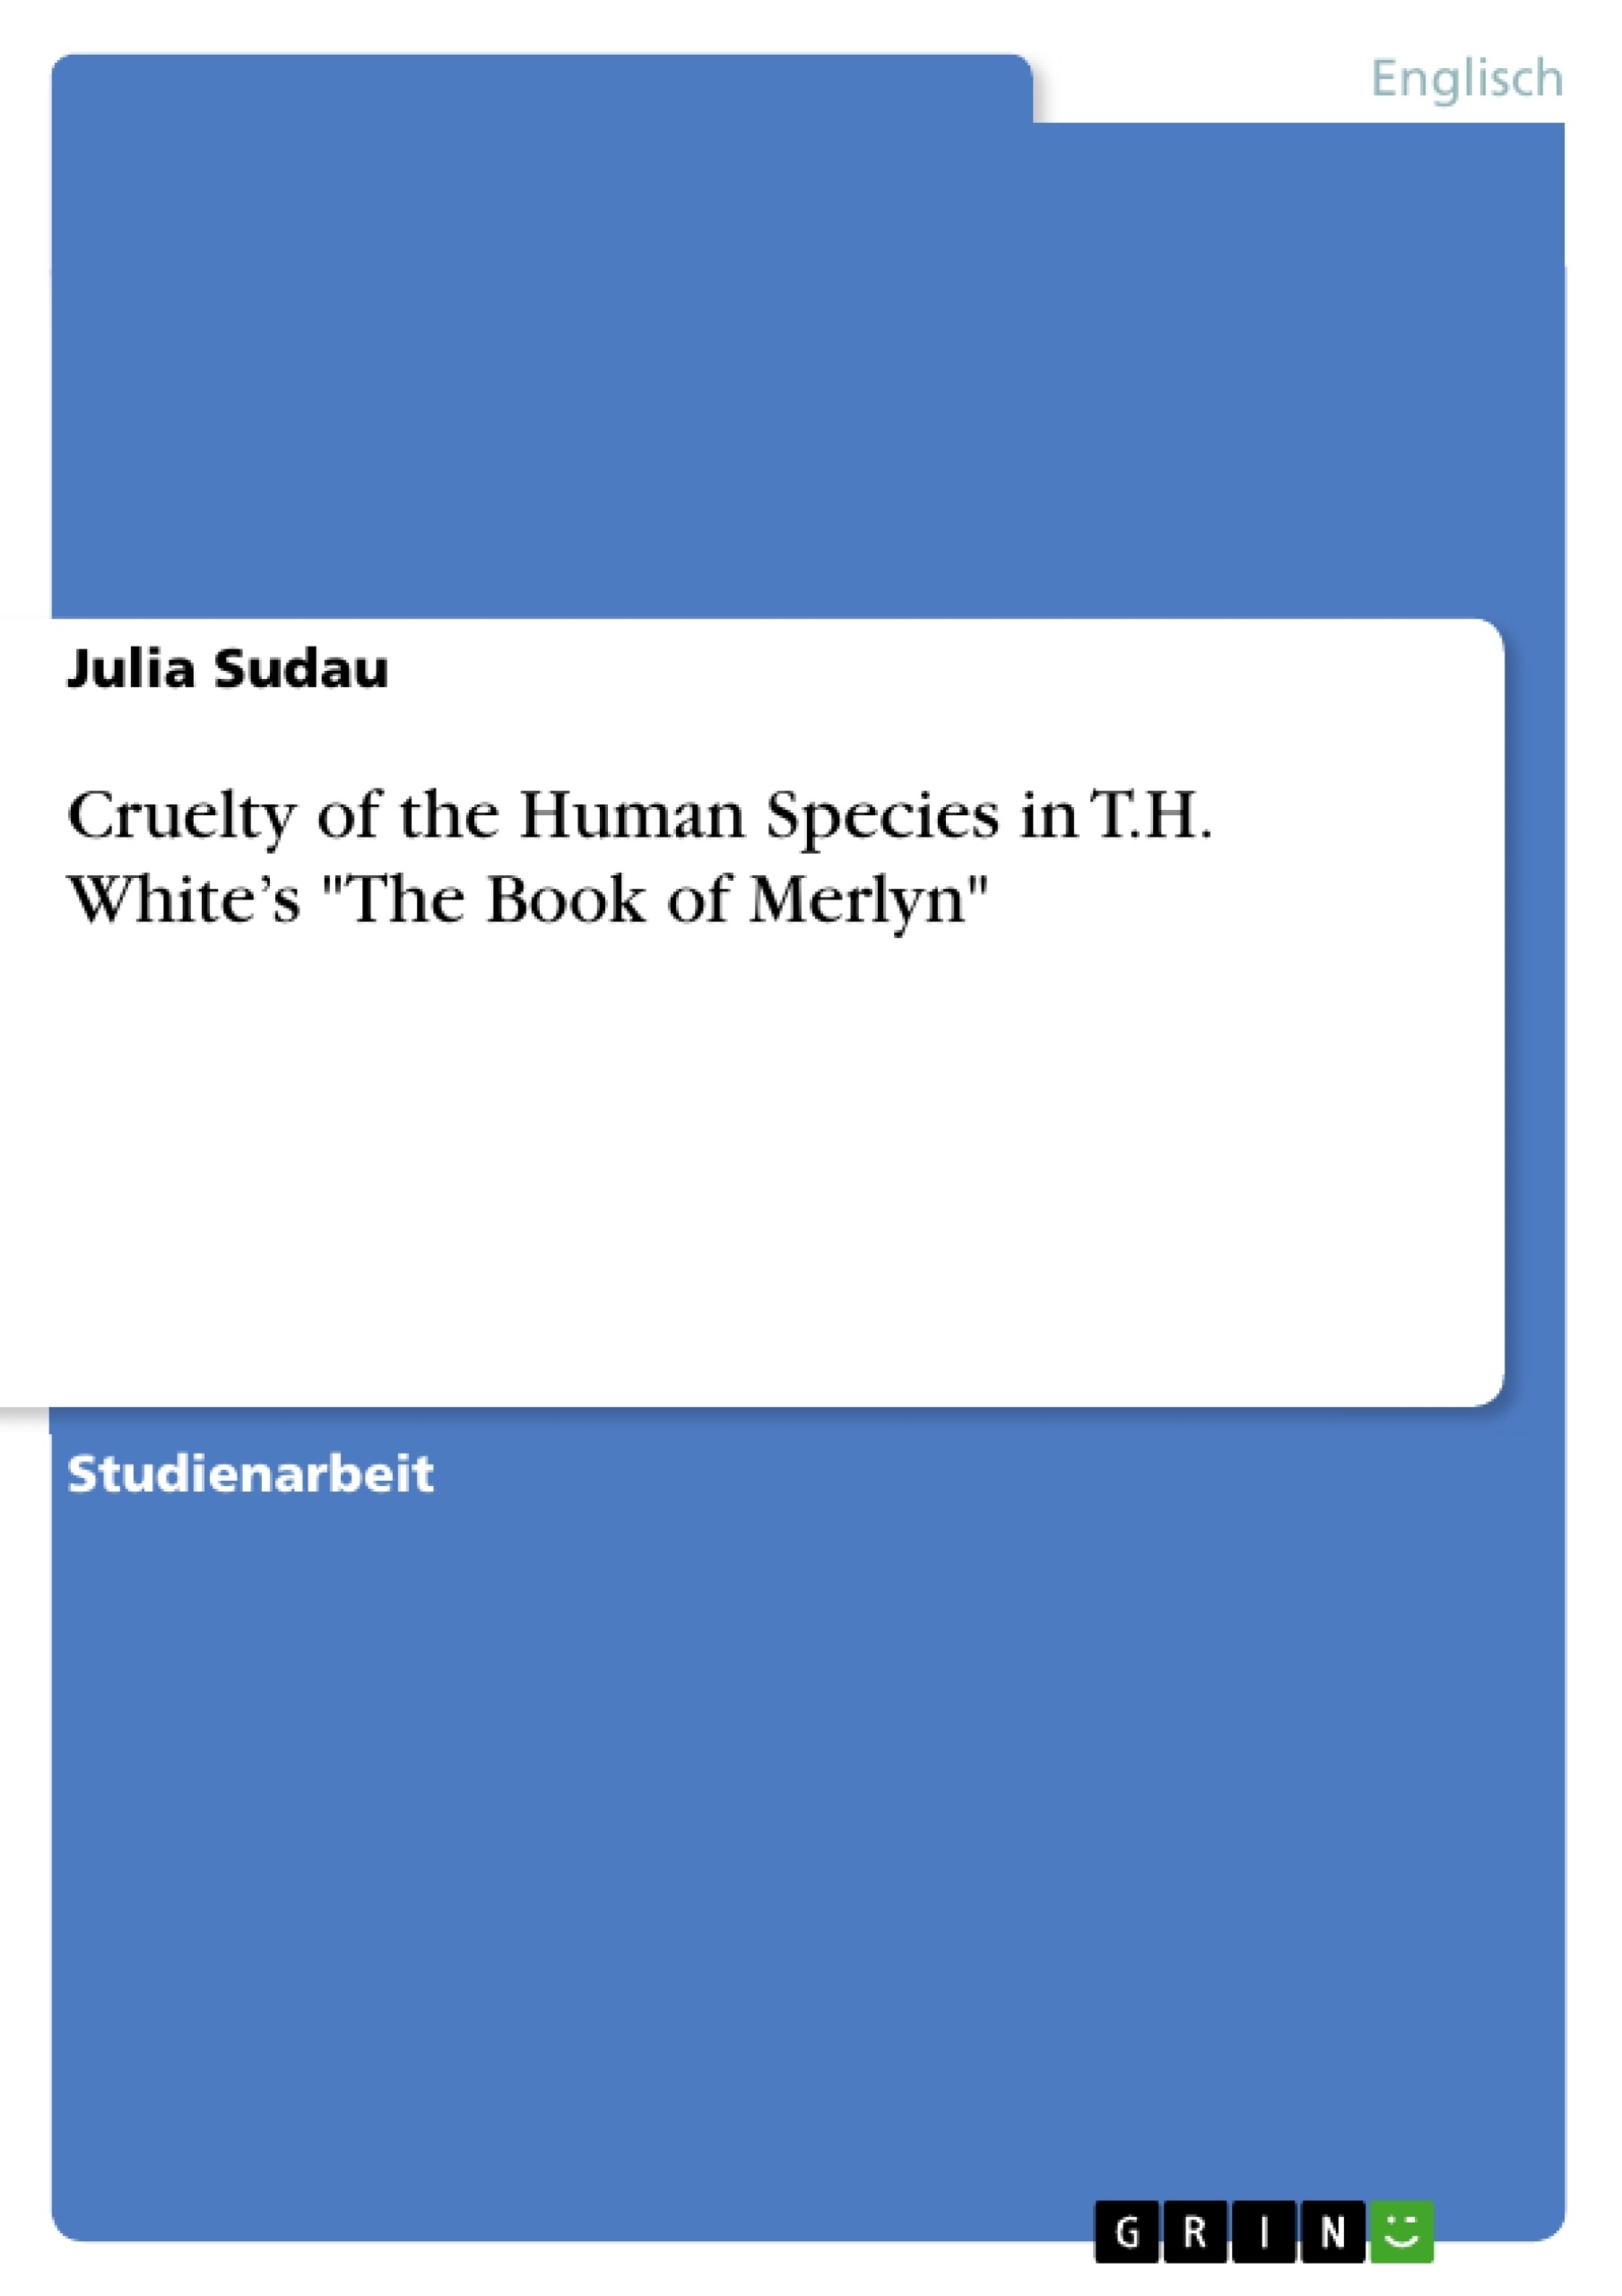 Título: Cruelty of the Human Species in T.H. White’s "The Book of Merlyn"